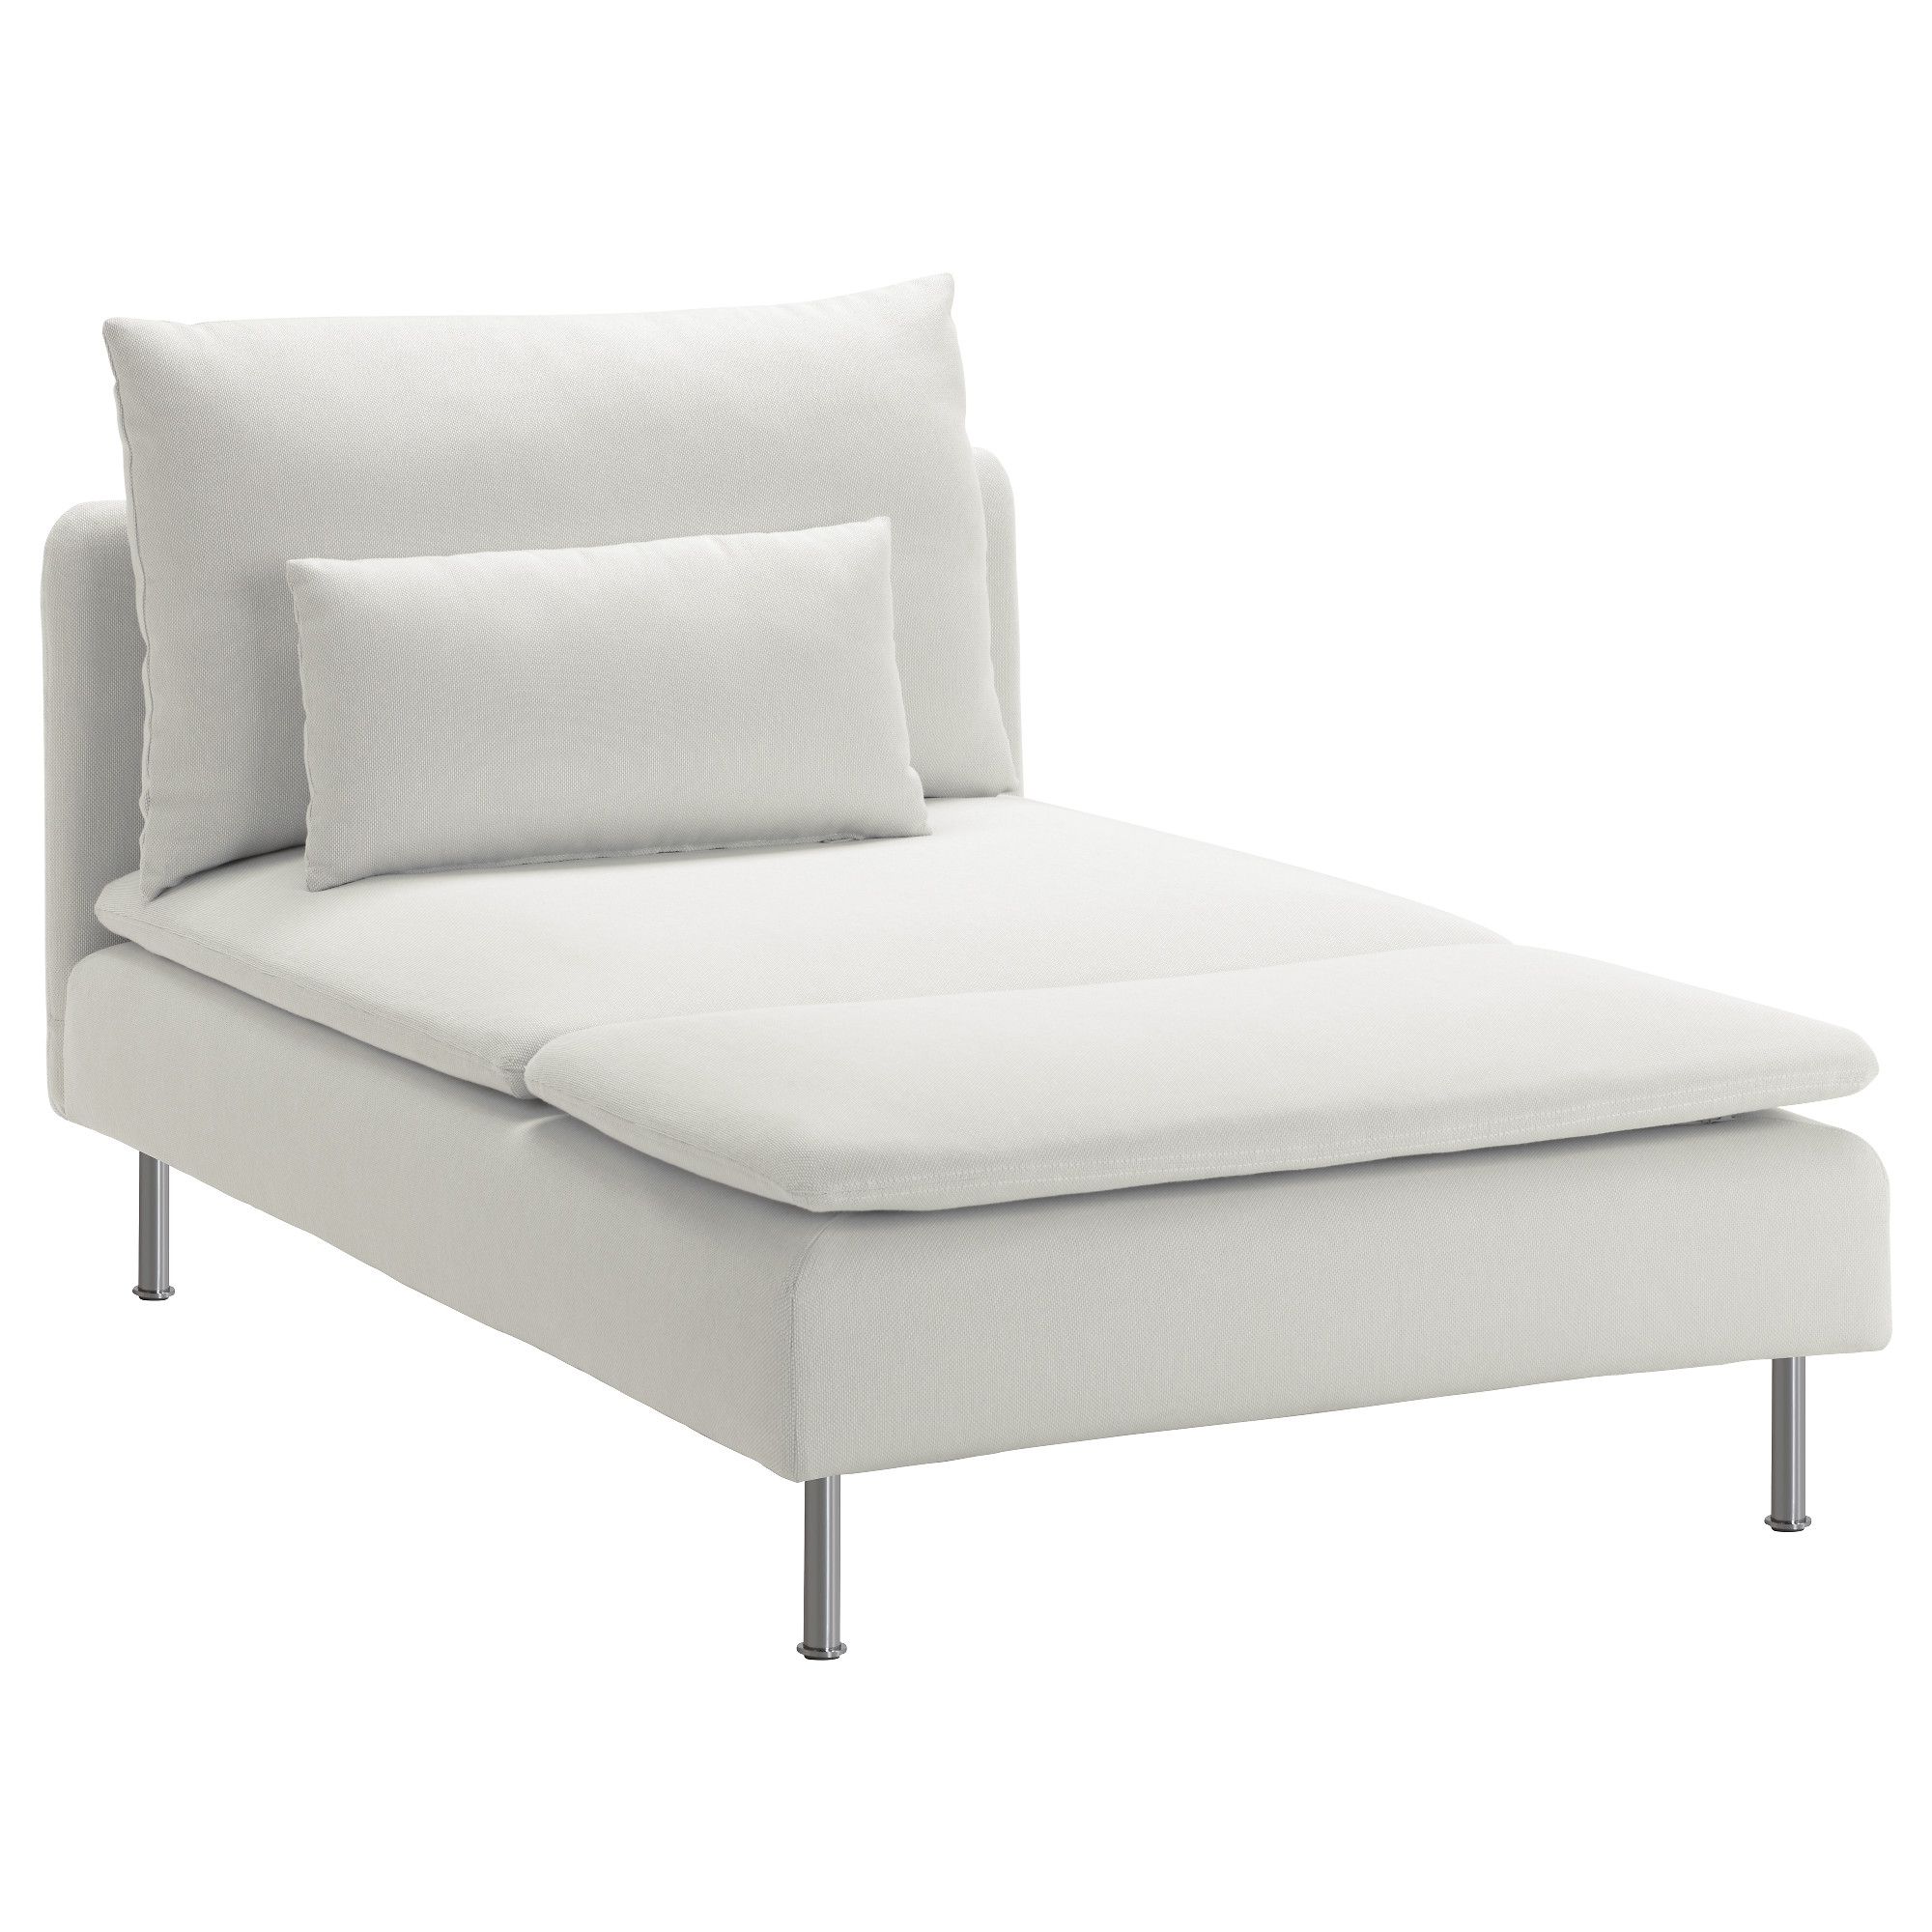 Most Recent Outdoor Ikea Chaise Lounge Chairs Pertaining To Söderhamn Chaise – Samsta Light Pink – Ikea (View 12 of 15)